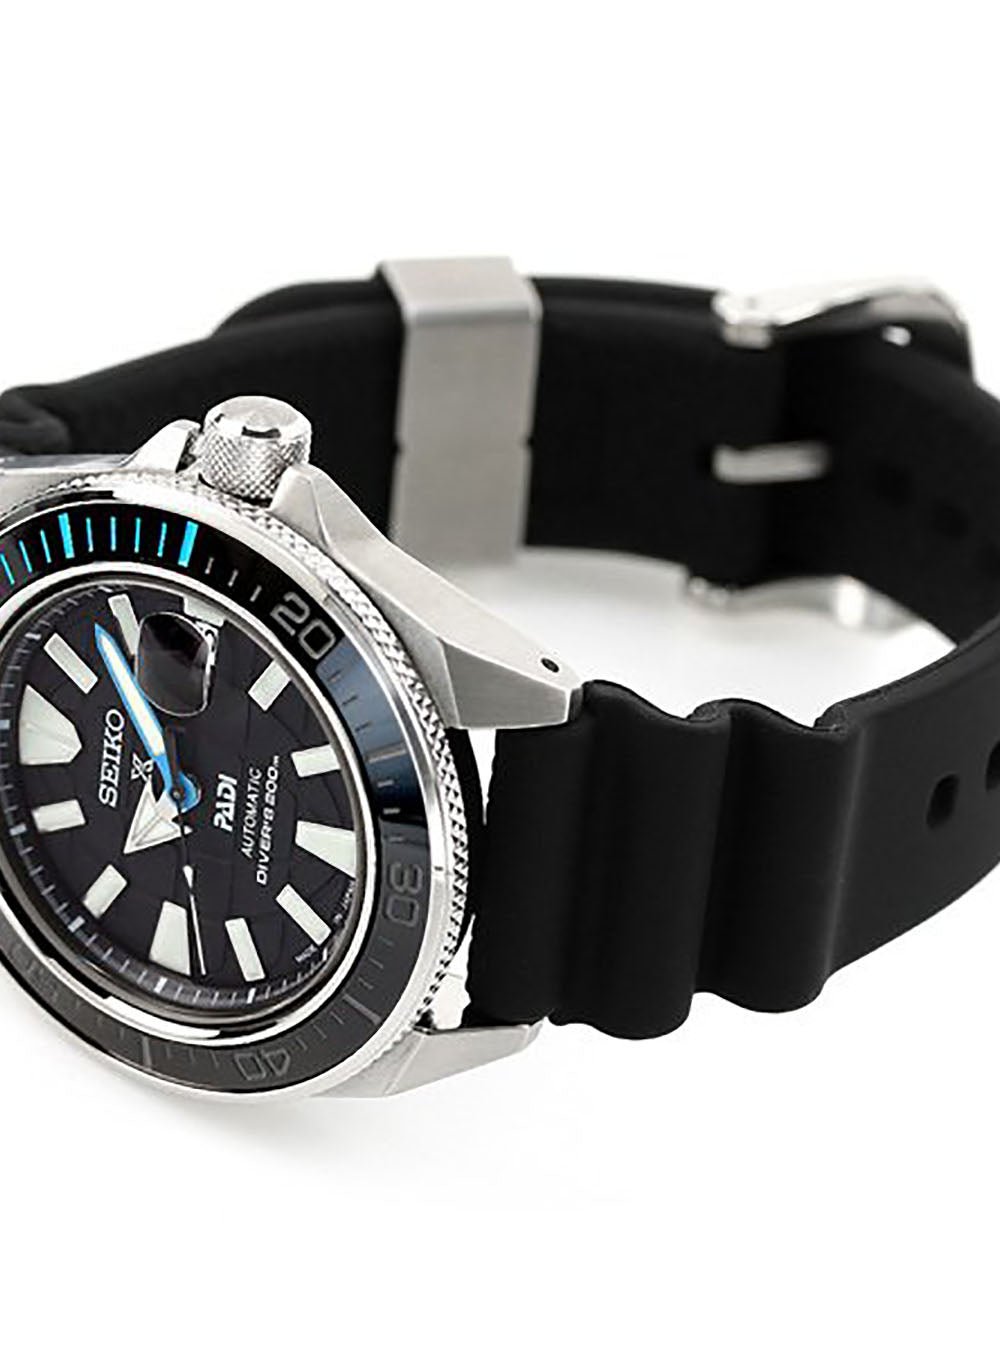 SEIKO PROSPEX DIVER SCUBA PADI SBDY095 SPECIAL EDITION MADE IN JAPAN JDMWRISTWATCHjapan-select